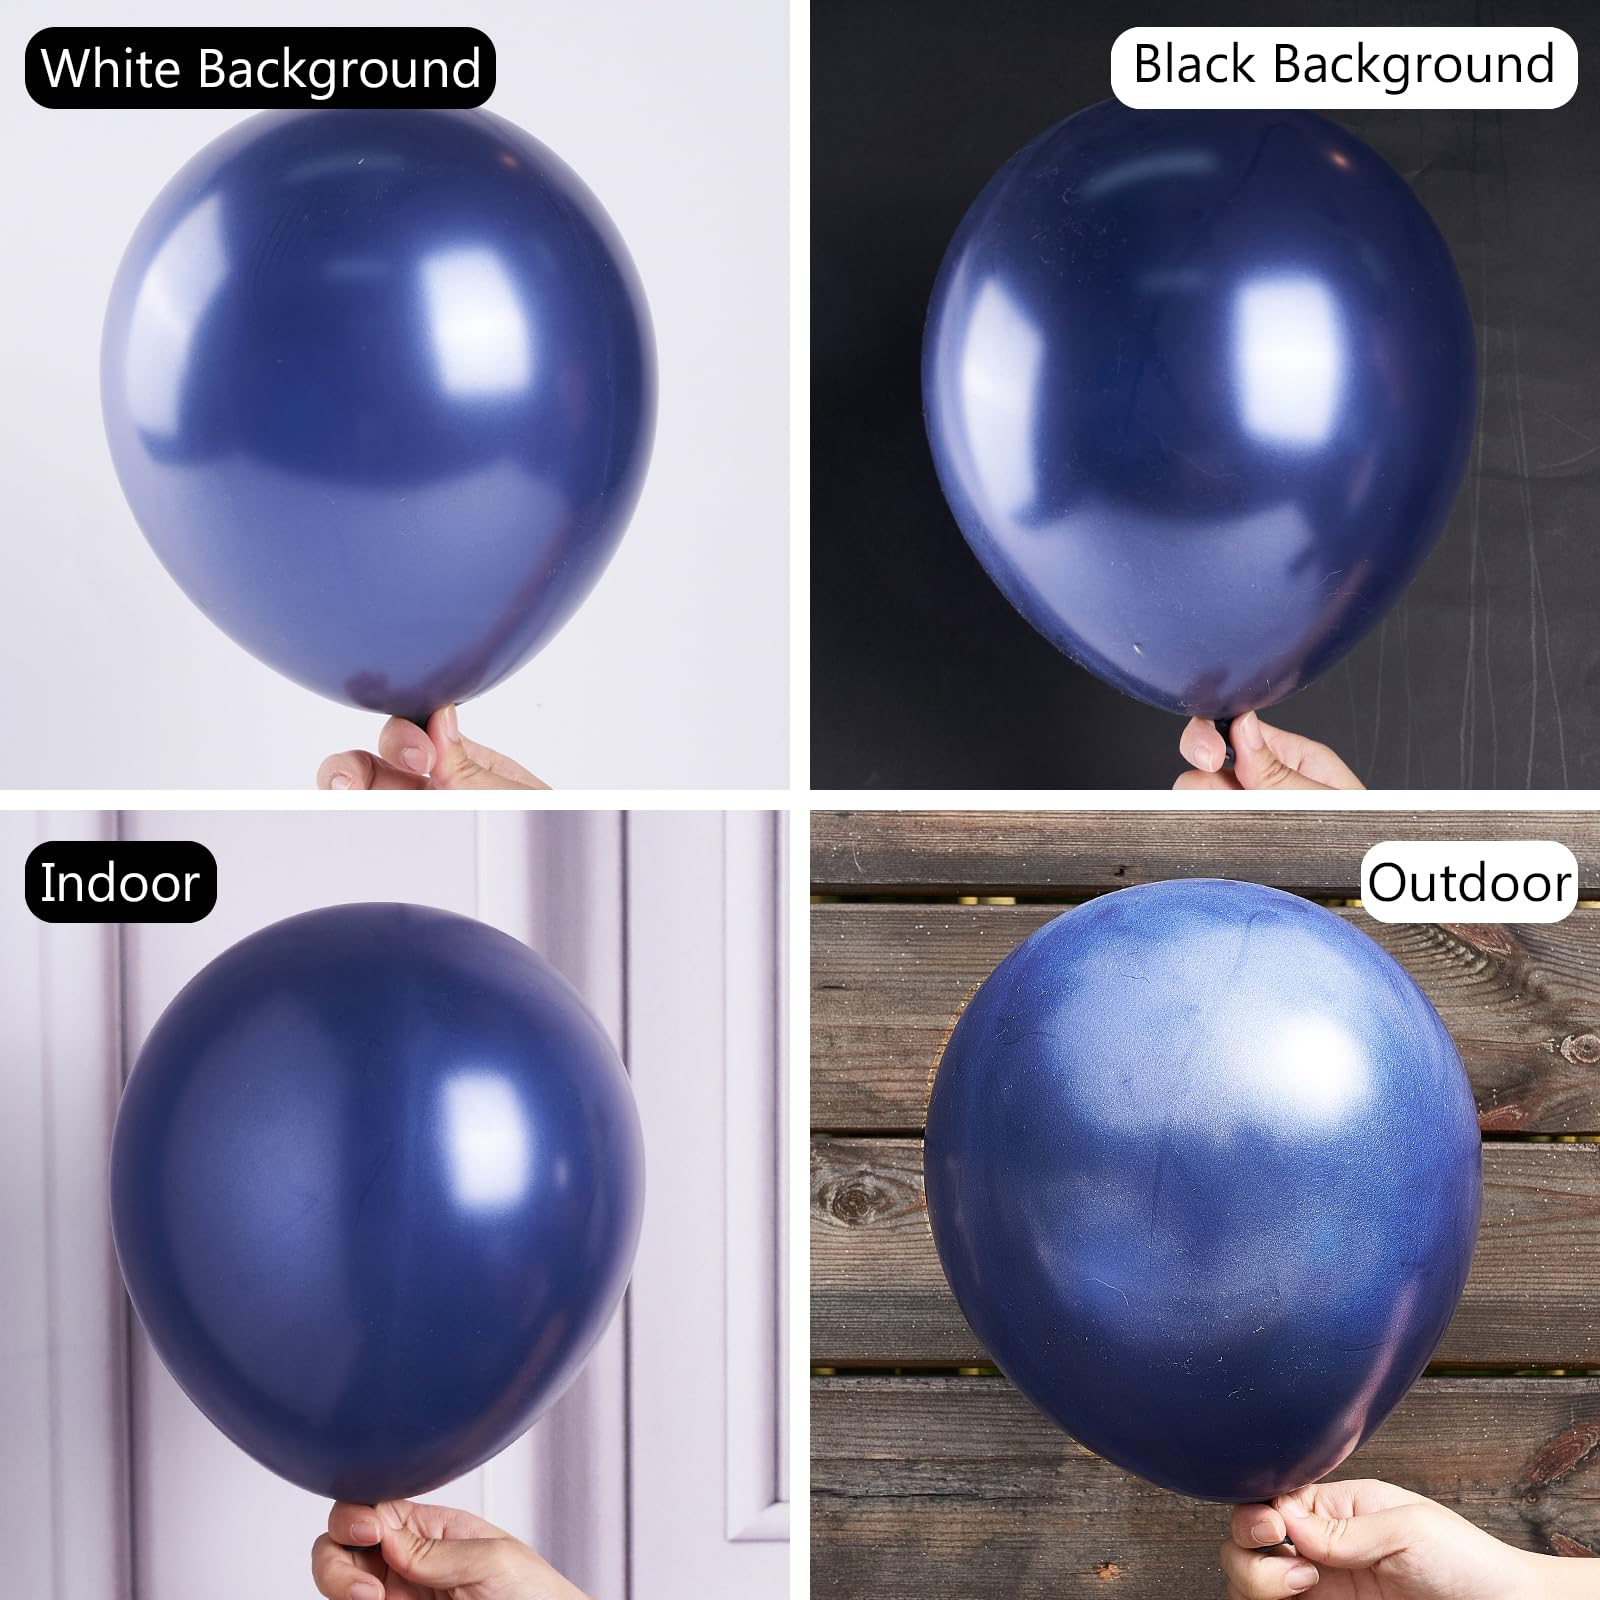 PartyWoo Navy Blue Balloons, 80 pcs Pearl Navy Blue Balloons Different Sizes Pack of 5 Inch and 12 Inch Navy Balloons for Balloon Garland or Arch as Party Decorations, Birthday Decorations, Blue-Z90